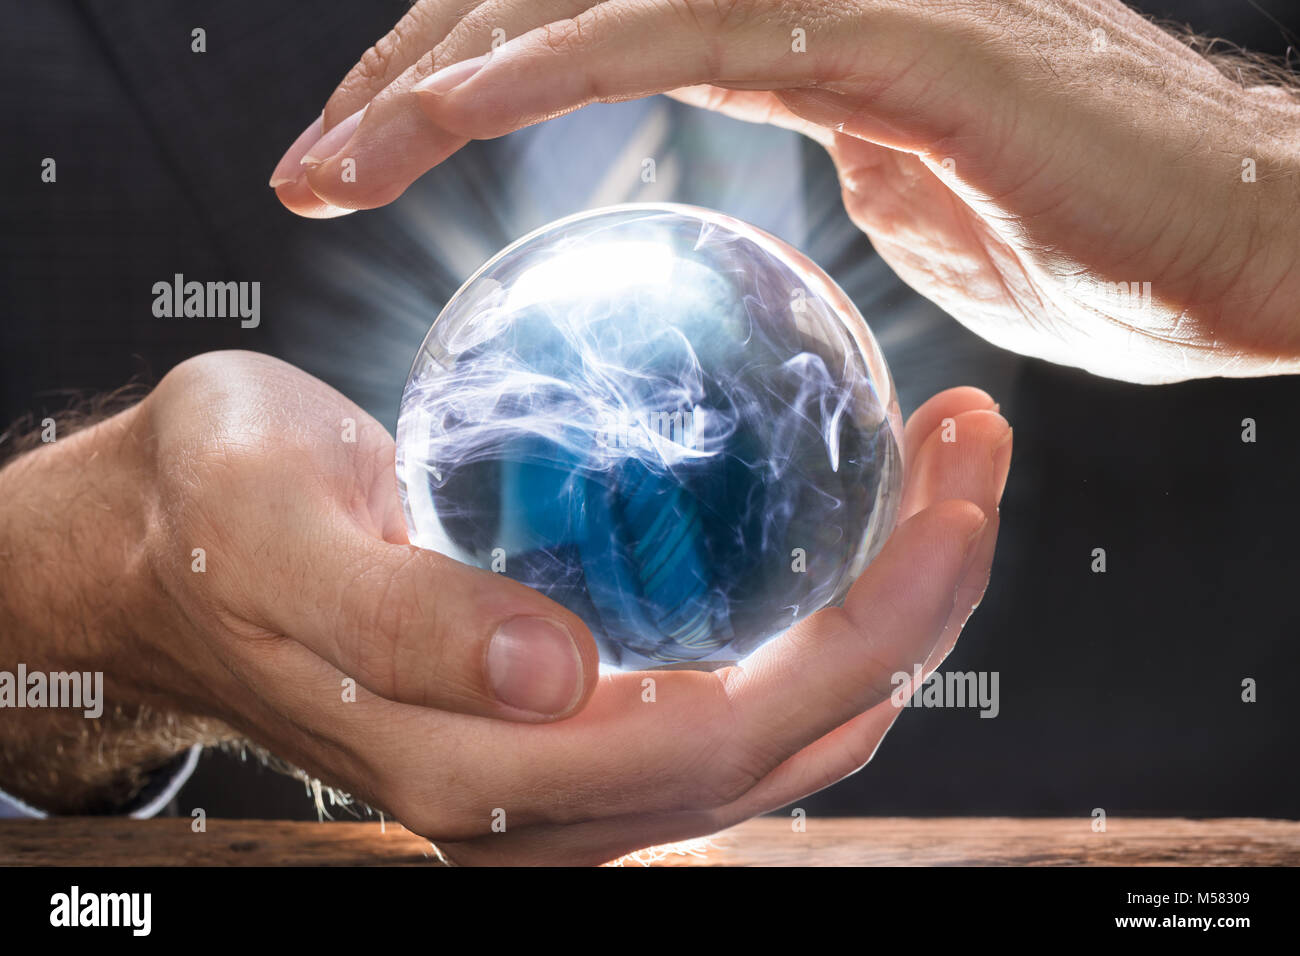 Midsection of businessman covering crystal ball with swirling smoke at wooden table Stock Photo